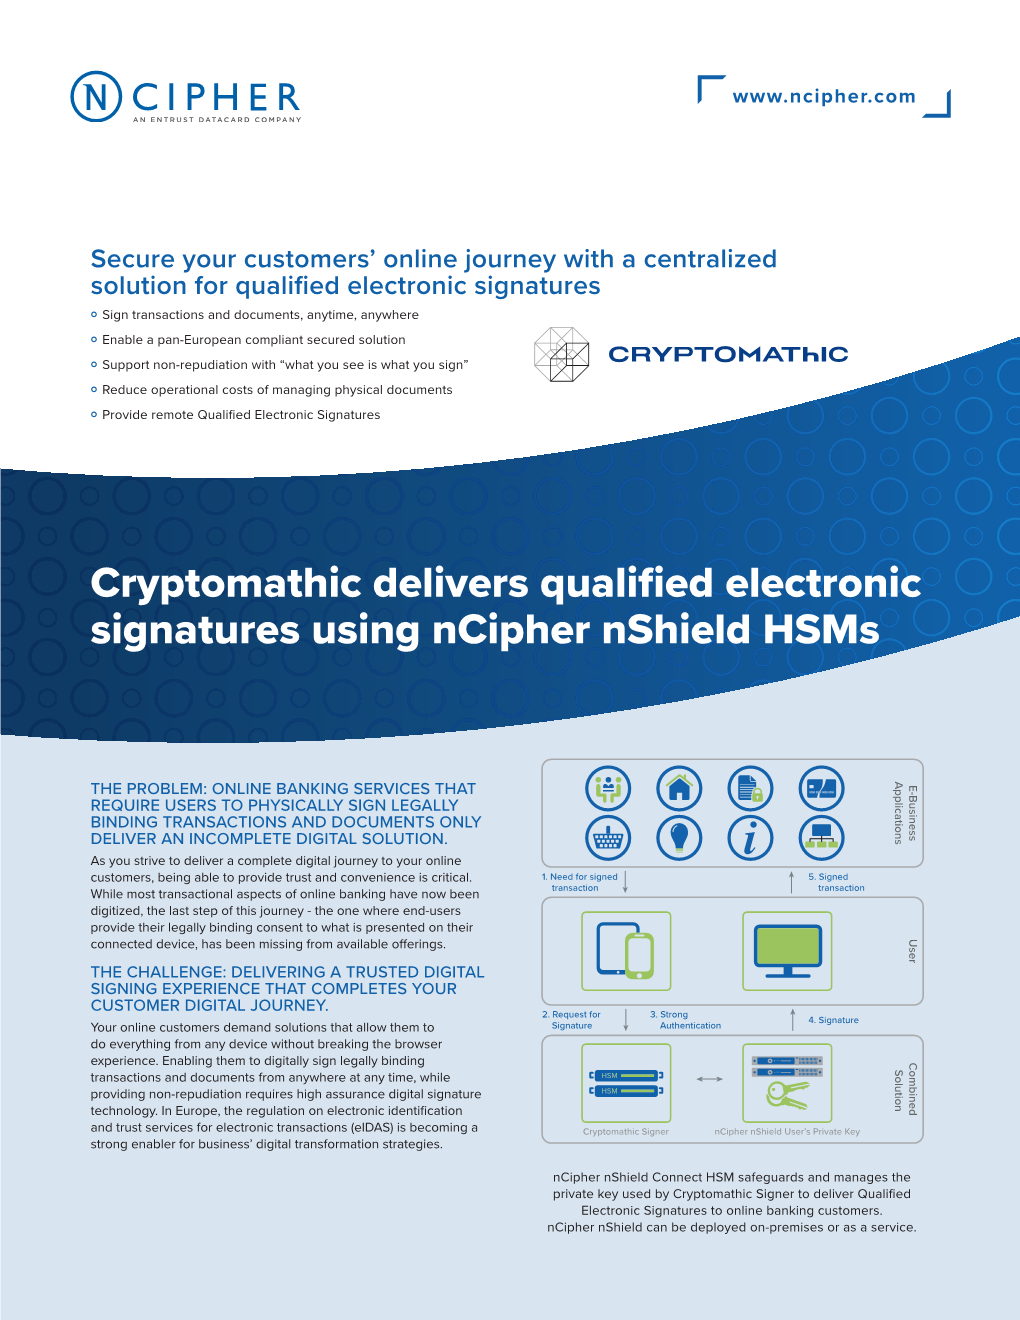 Cryptomathic Delivers Qualified Electronic Signatures Using Ncipher Nshield Hsms